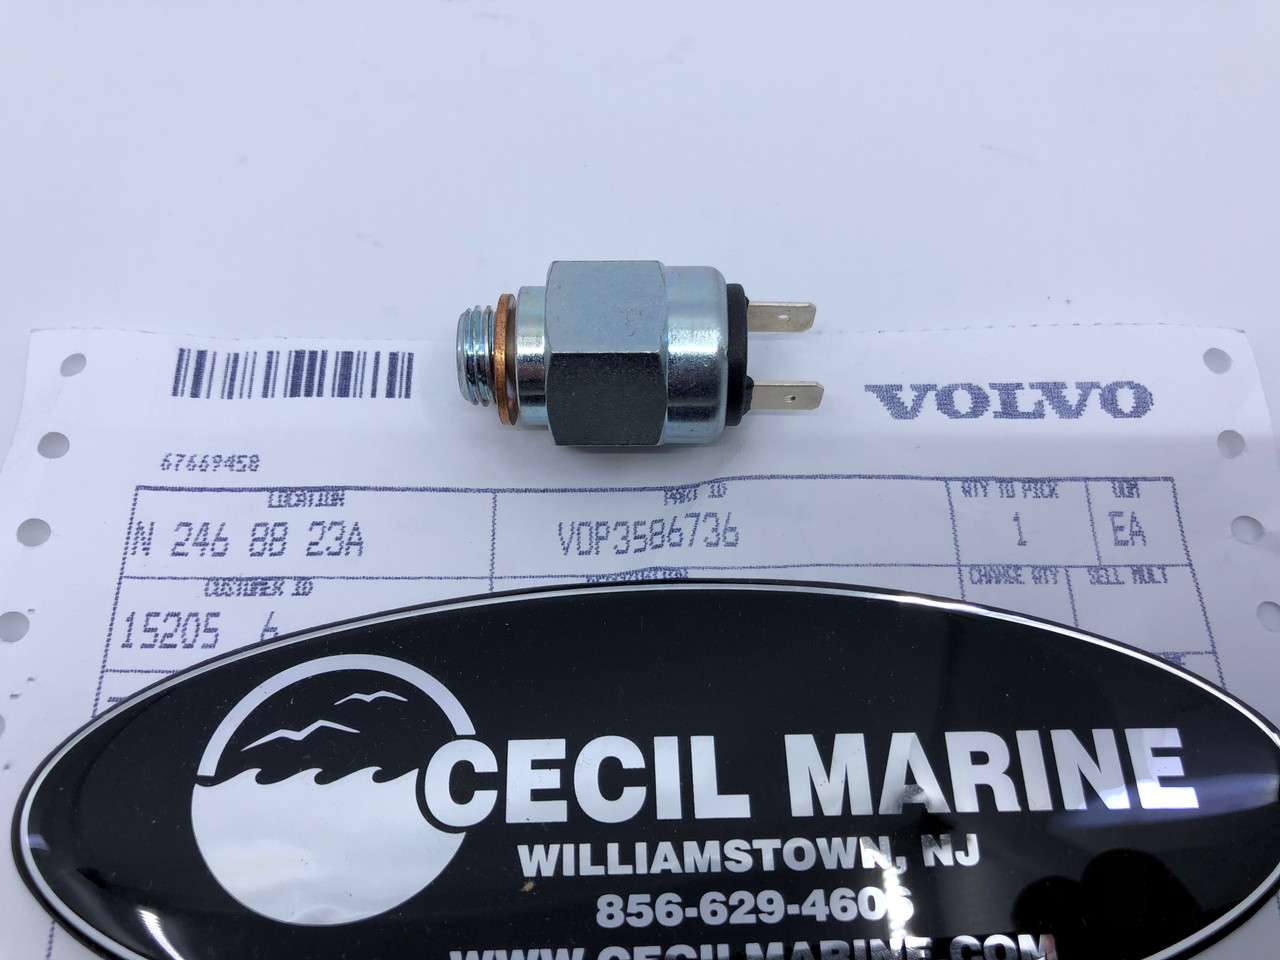 $99.99* GENUINE VOLVO no tax* GENUINE VOLVO PRESSURE SWITCH 3586736  *Special Order 10 To 14 Days For Delivery